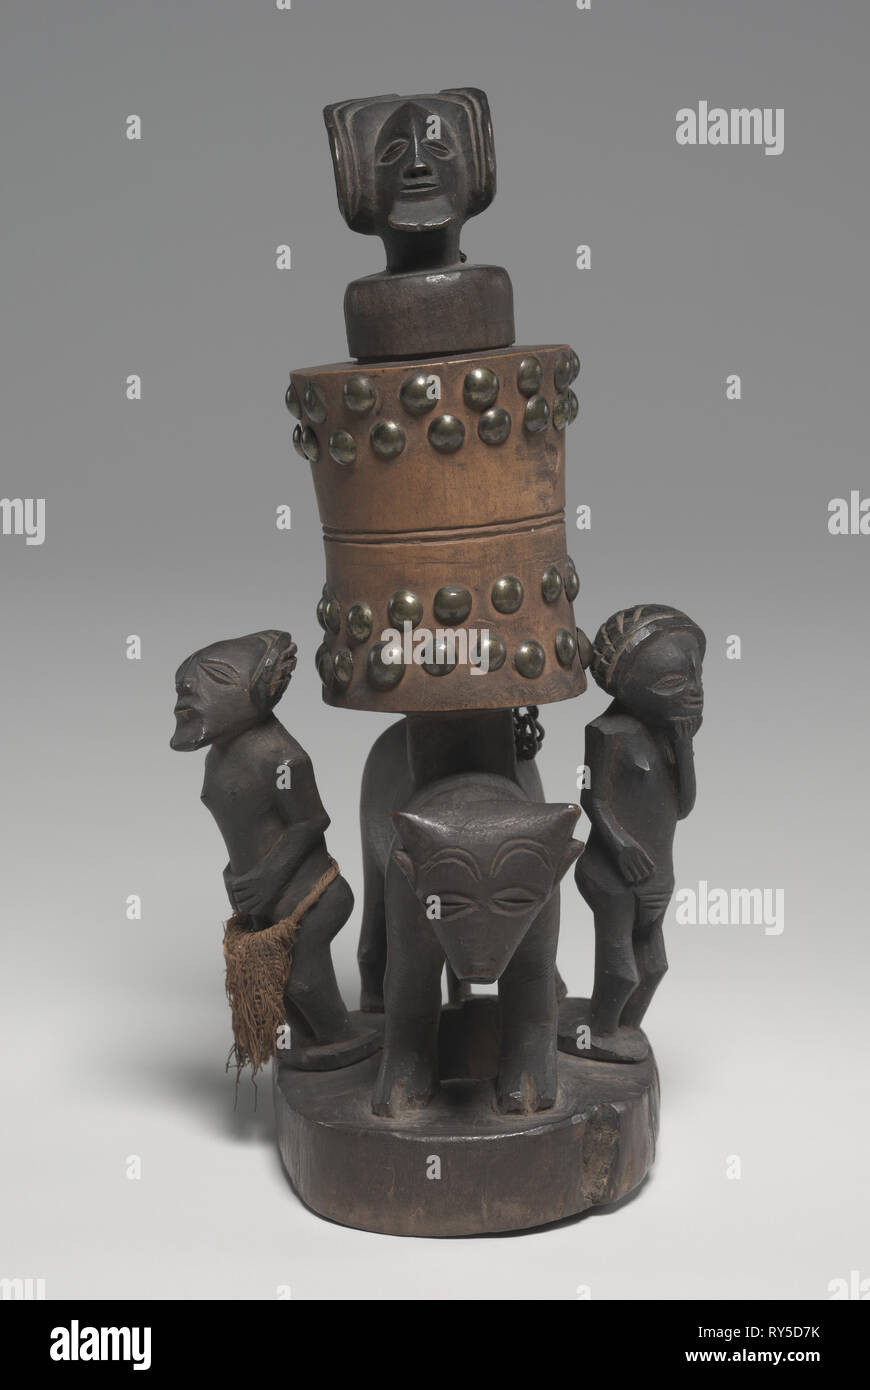 Mortar, late 1800s. Central Africa, Democratic Republic of the Congo or Angola, Chokwe, late 19th century. Wood, metal, fiber; overall: 22.5 x 8.4 x 13.8 cm (8 7/8 x 3 5/16 x 5 7/16 in Stock Photo